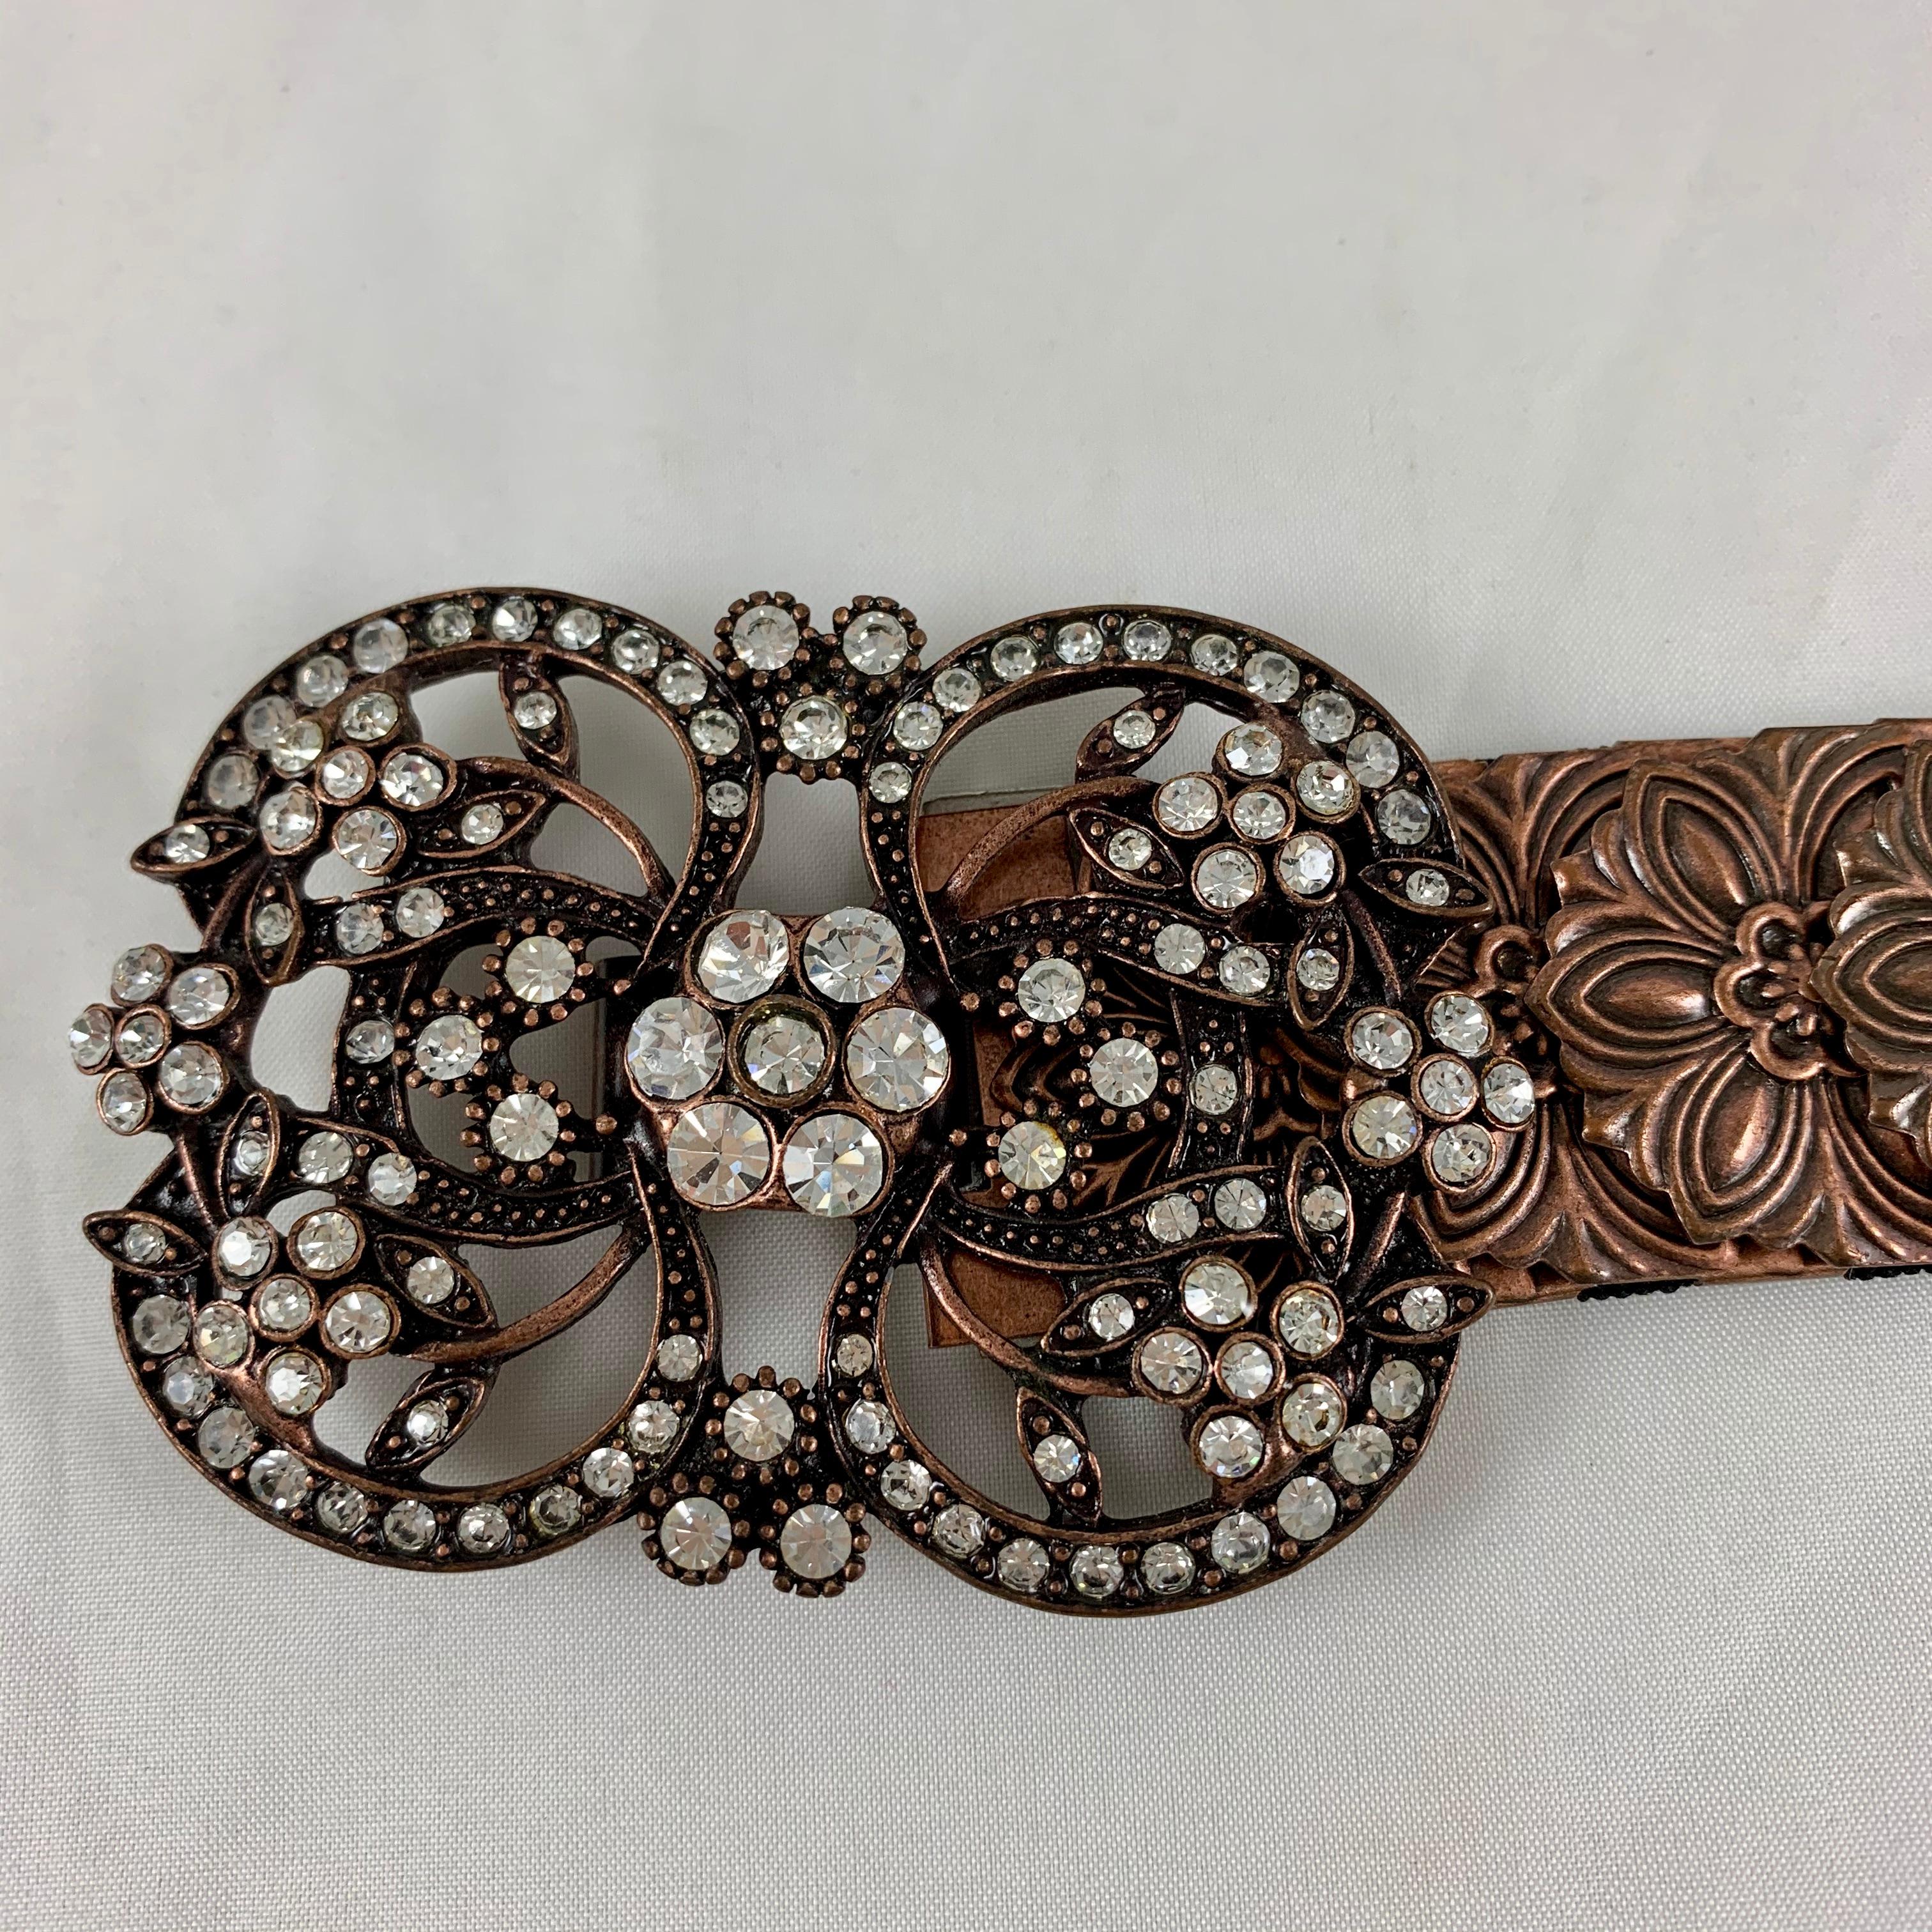 A 1970s era belt made of copper-tone metal snake scale links with a metal and crystal jeweled medallion buckle. Very well made.

Assembled by hand, the links show a stamped floral pattern attached to a black elasticized fabric backing. The links